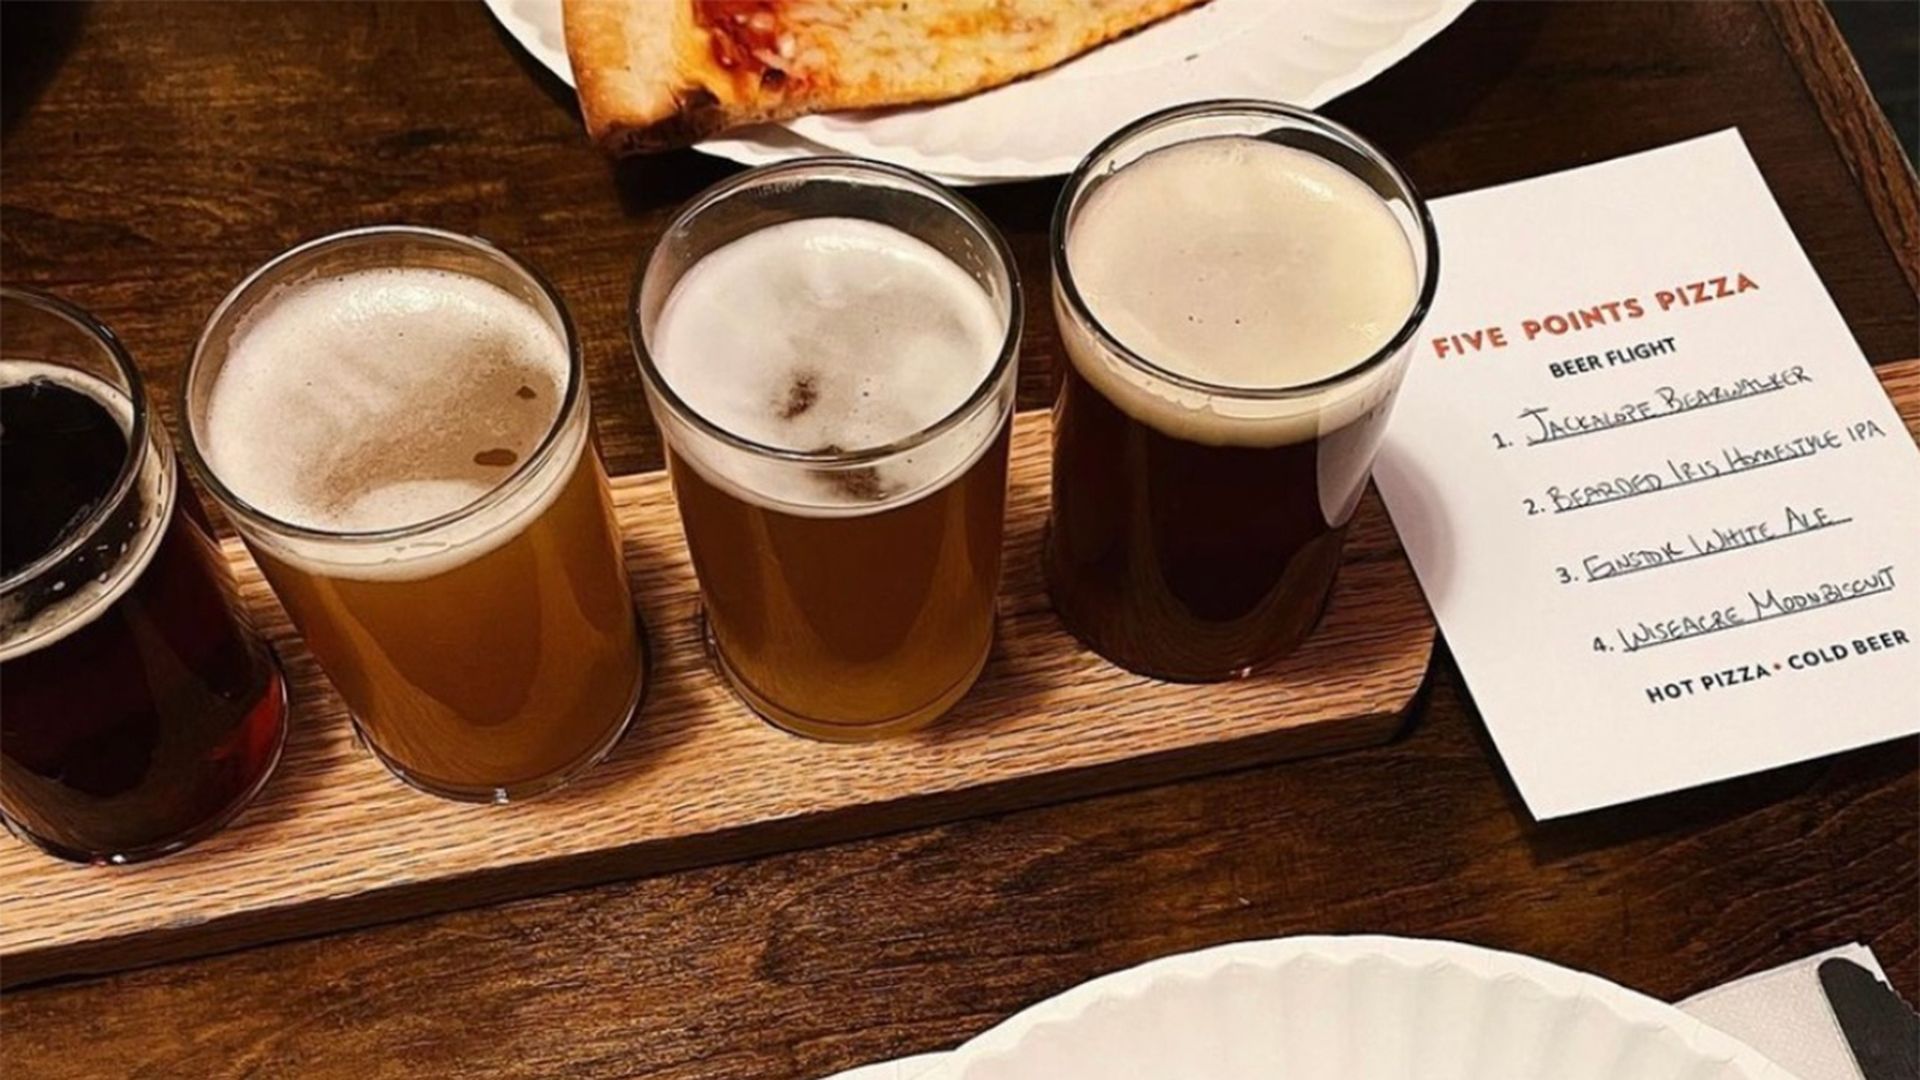 Draft beer flight and pizza